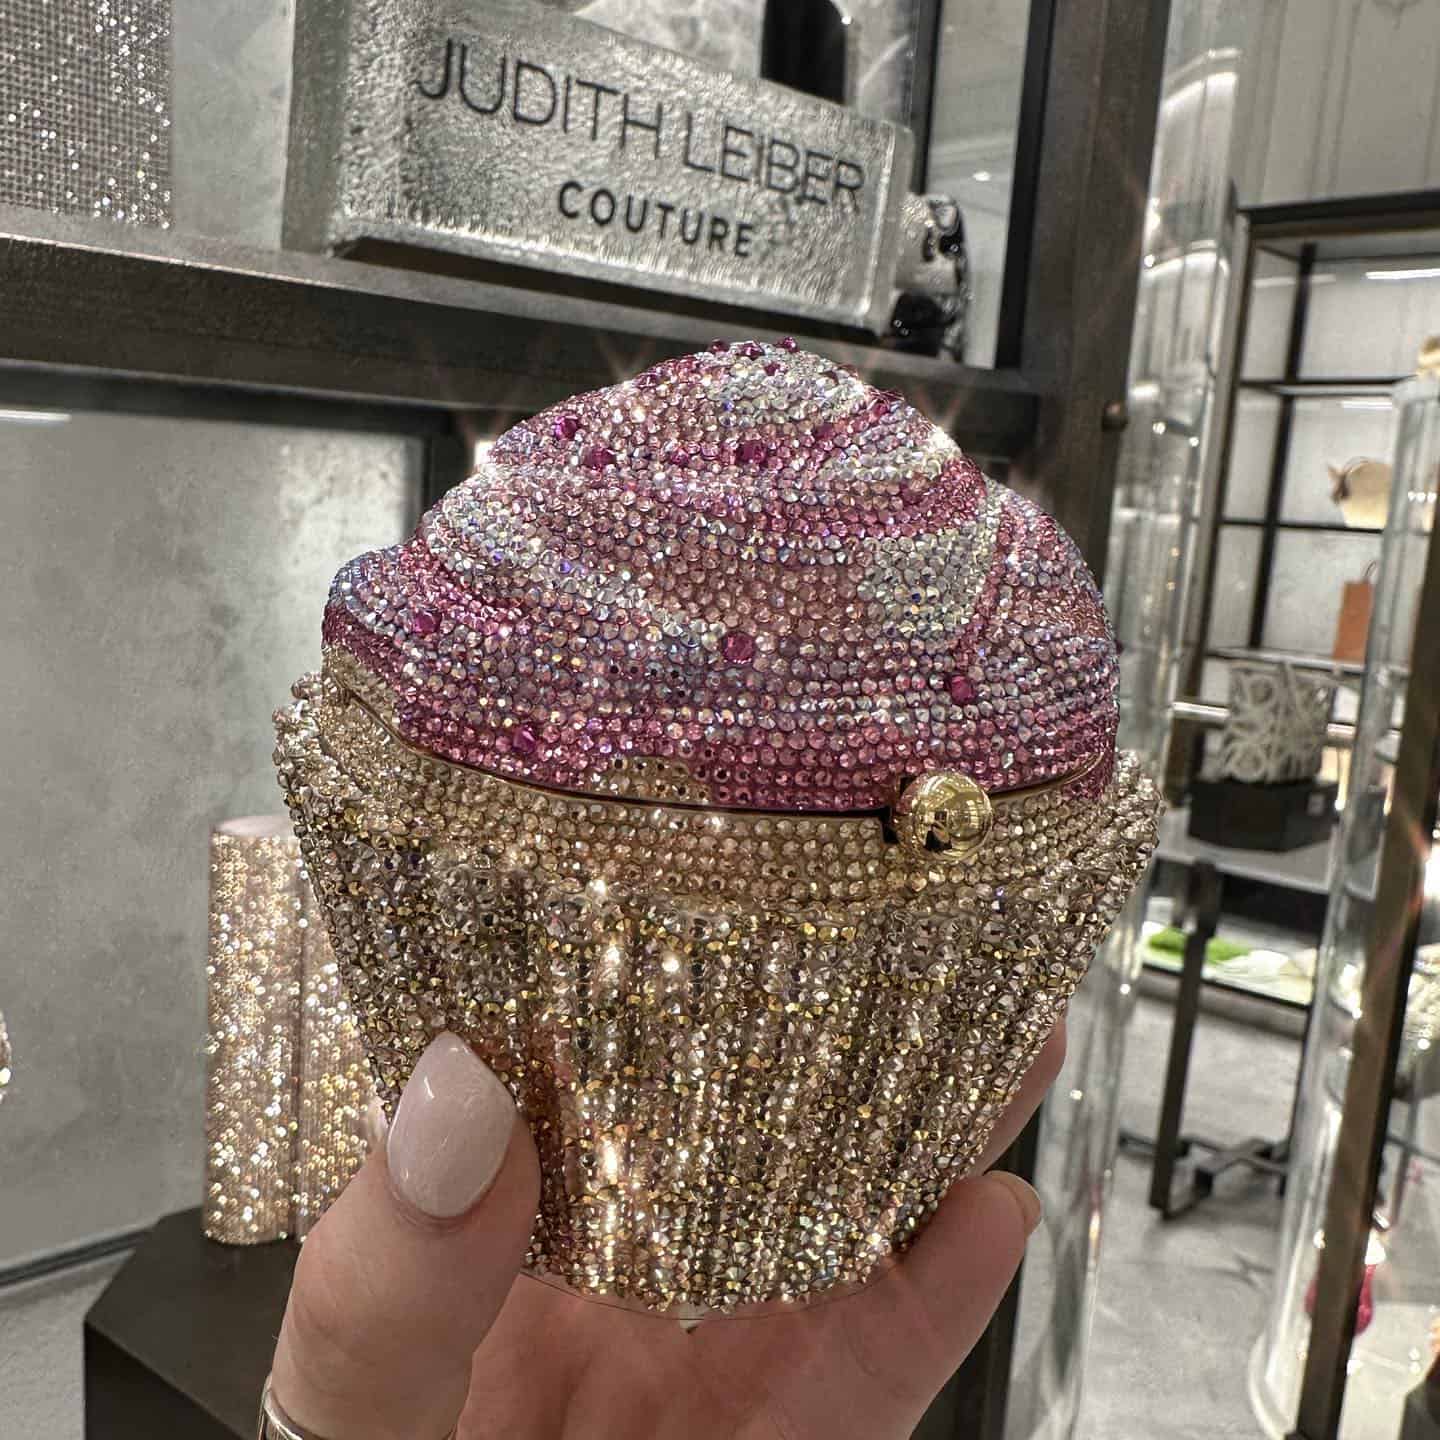 Judith Leiber Cupcake bag from Sex and the city movie